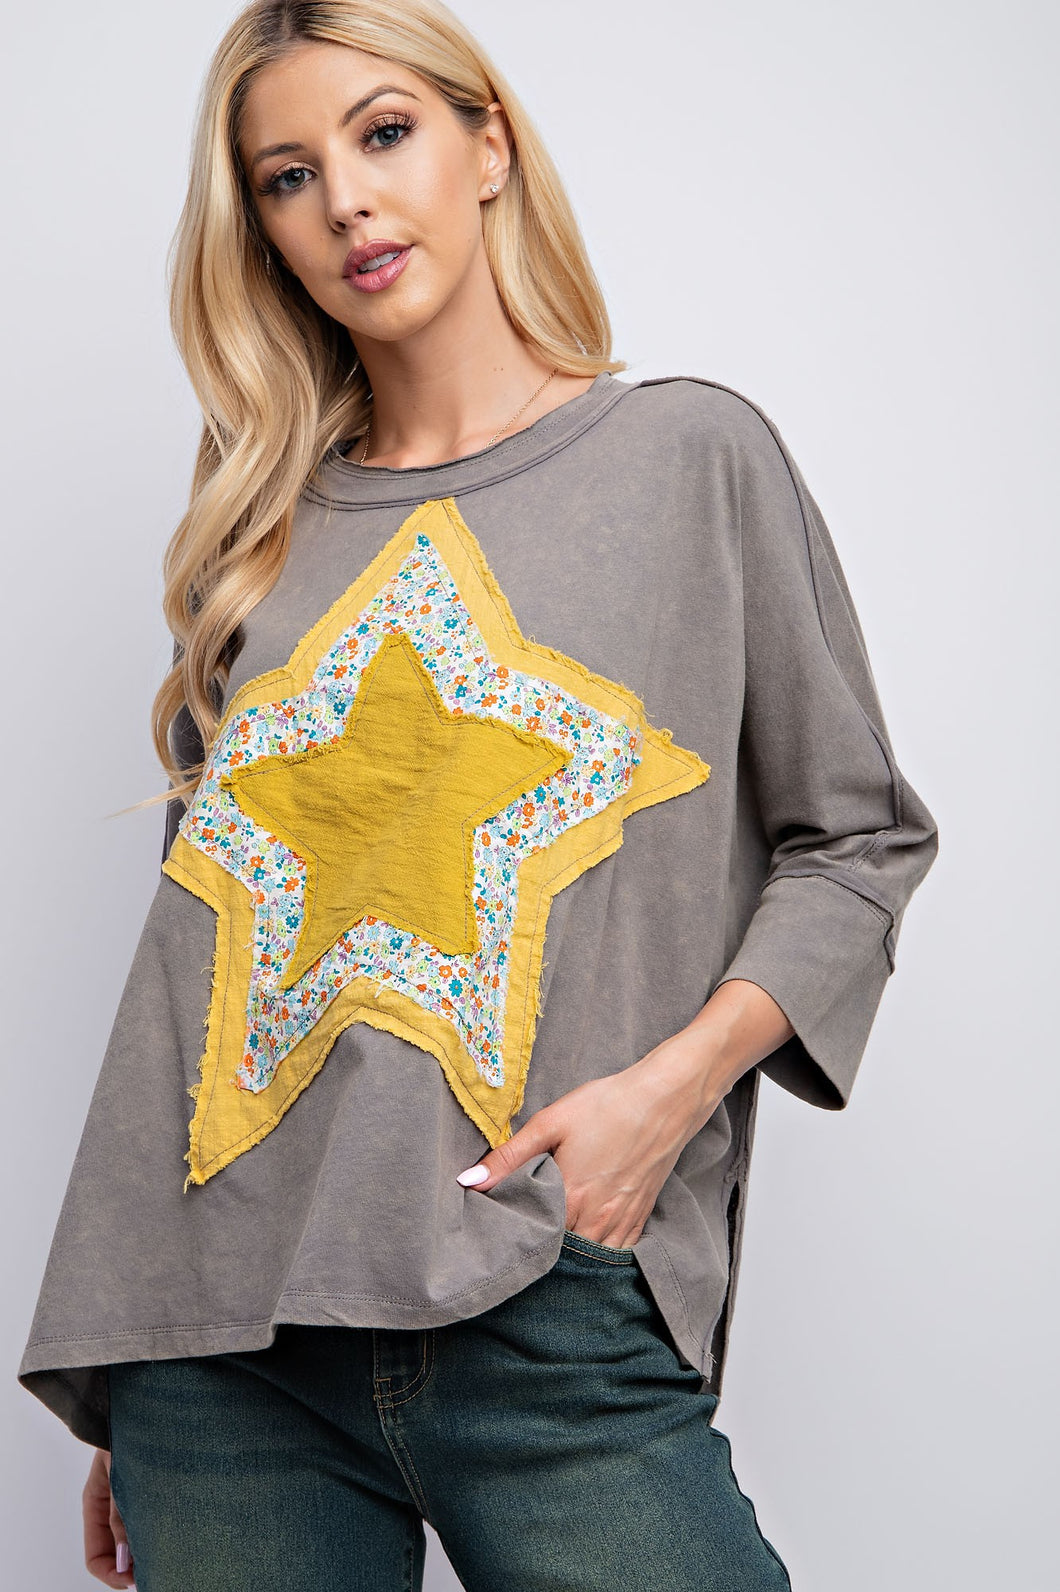 Easel Mineral Washed Star Patched Top in Ash Shirts & Tops Easel   